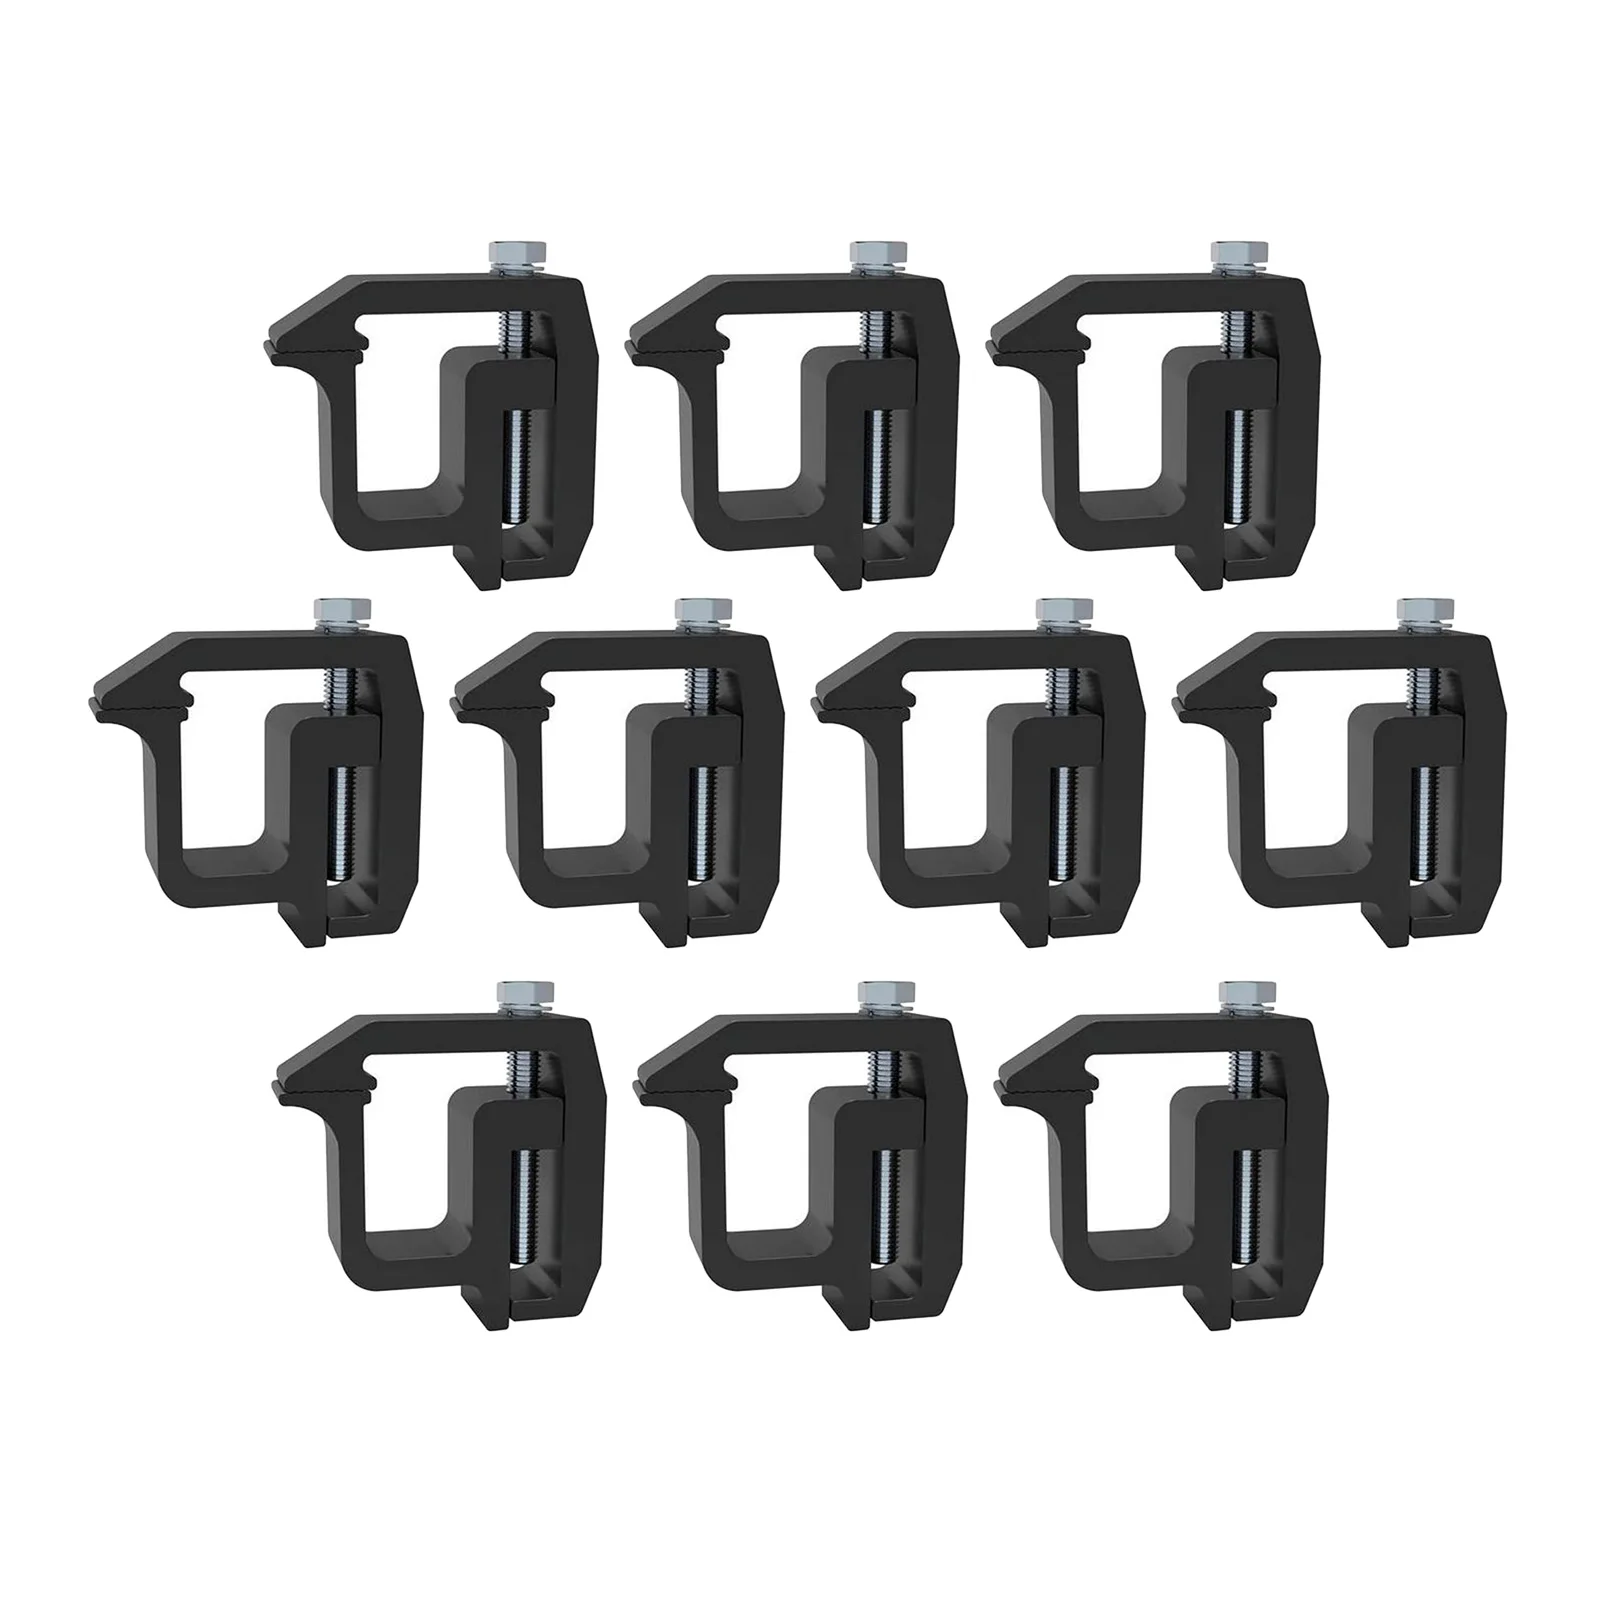 Aluminum Mounting Clamps Heavy Duty for Chevy 1500 2500 3500 and More Pick-up Truck Models Truck Bed Accessories Black